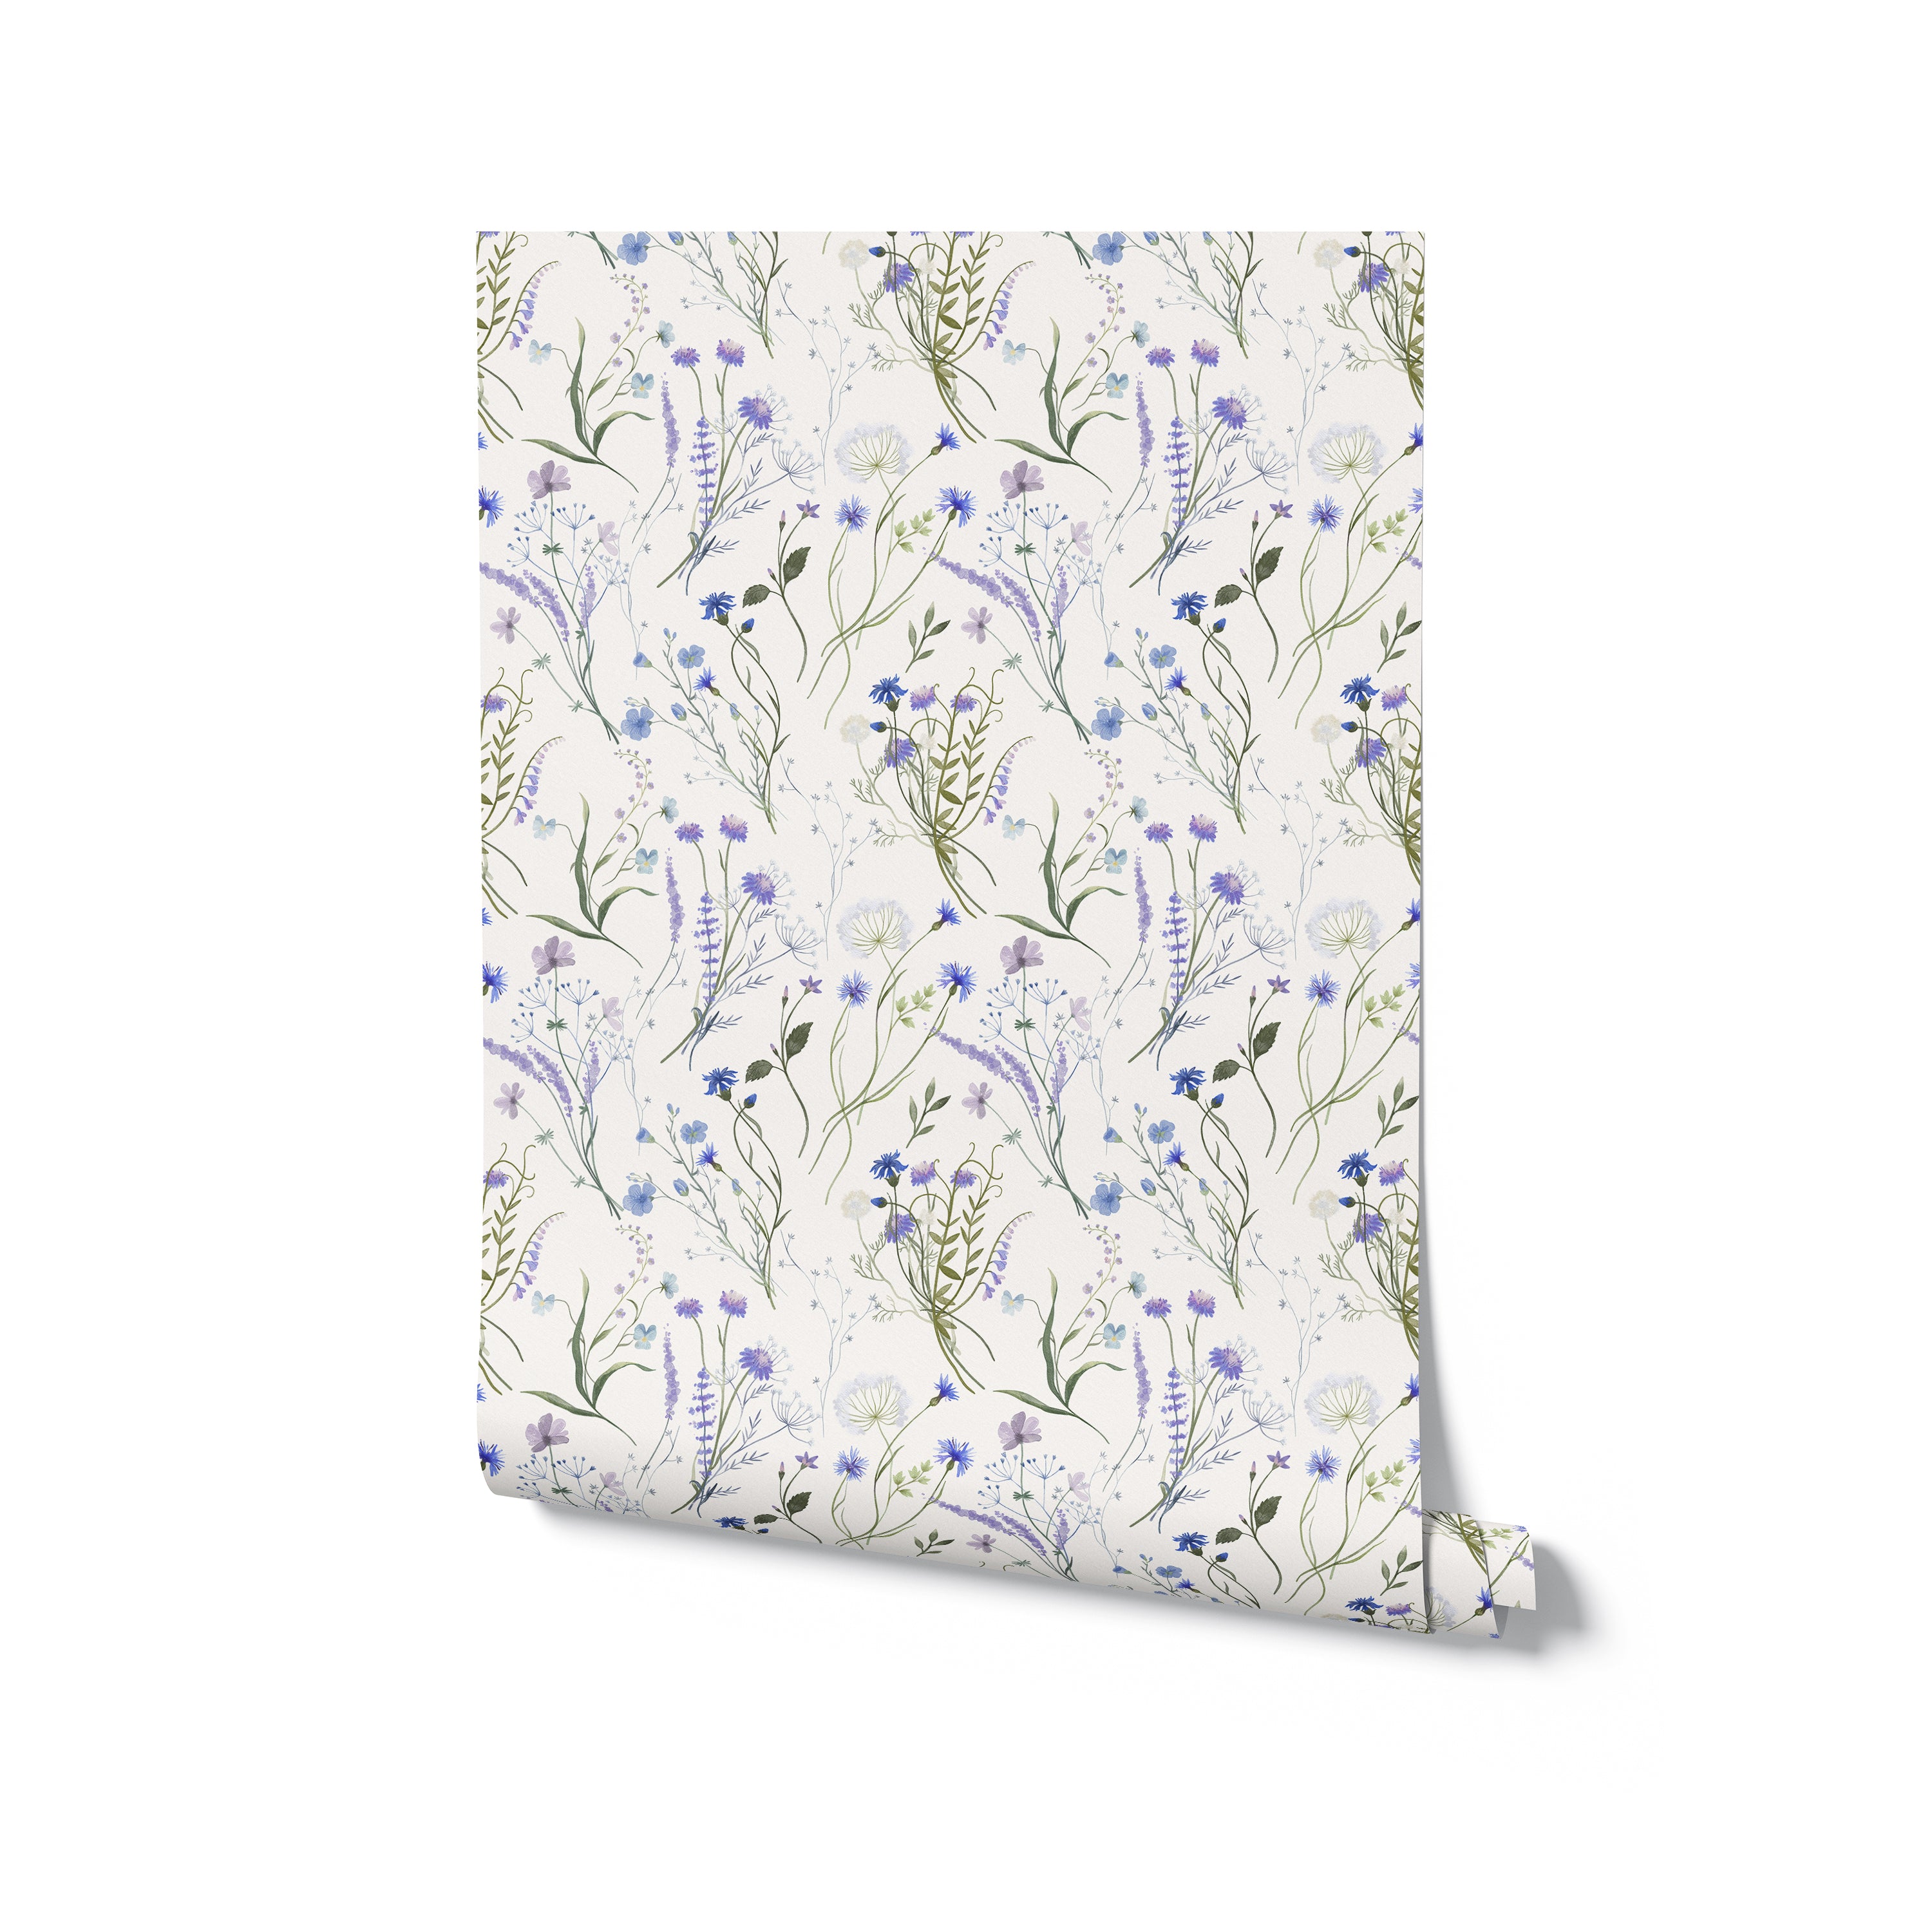 A roll of the Wildflower Bouquet Wallpaper, illustrating the lush and detailed design of wildflowers and greenery that make it perfect for adding a touch of nature’s beauty to any interior space.